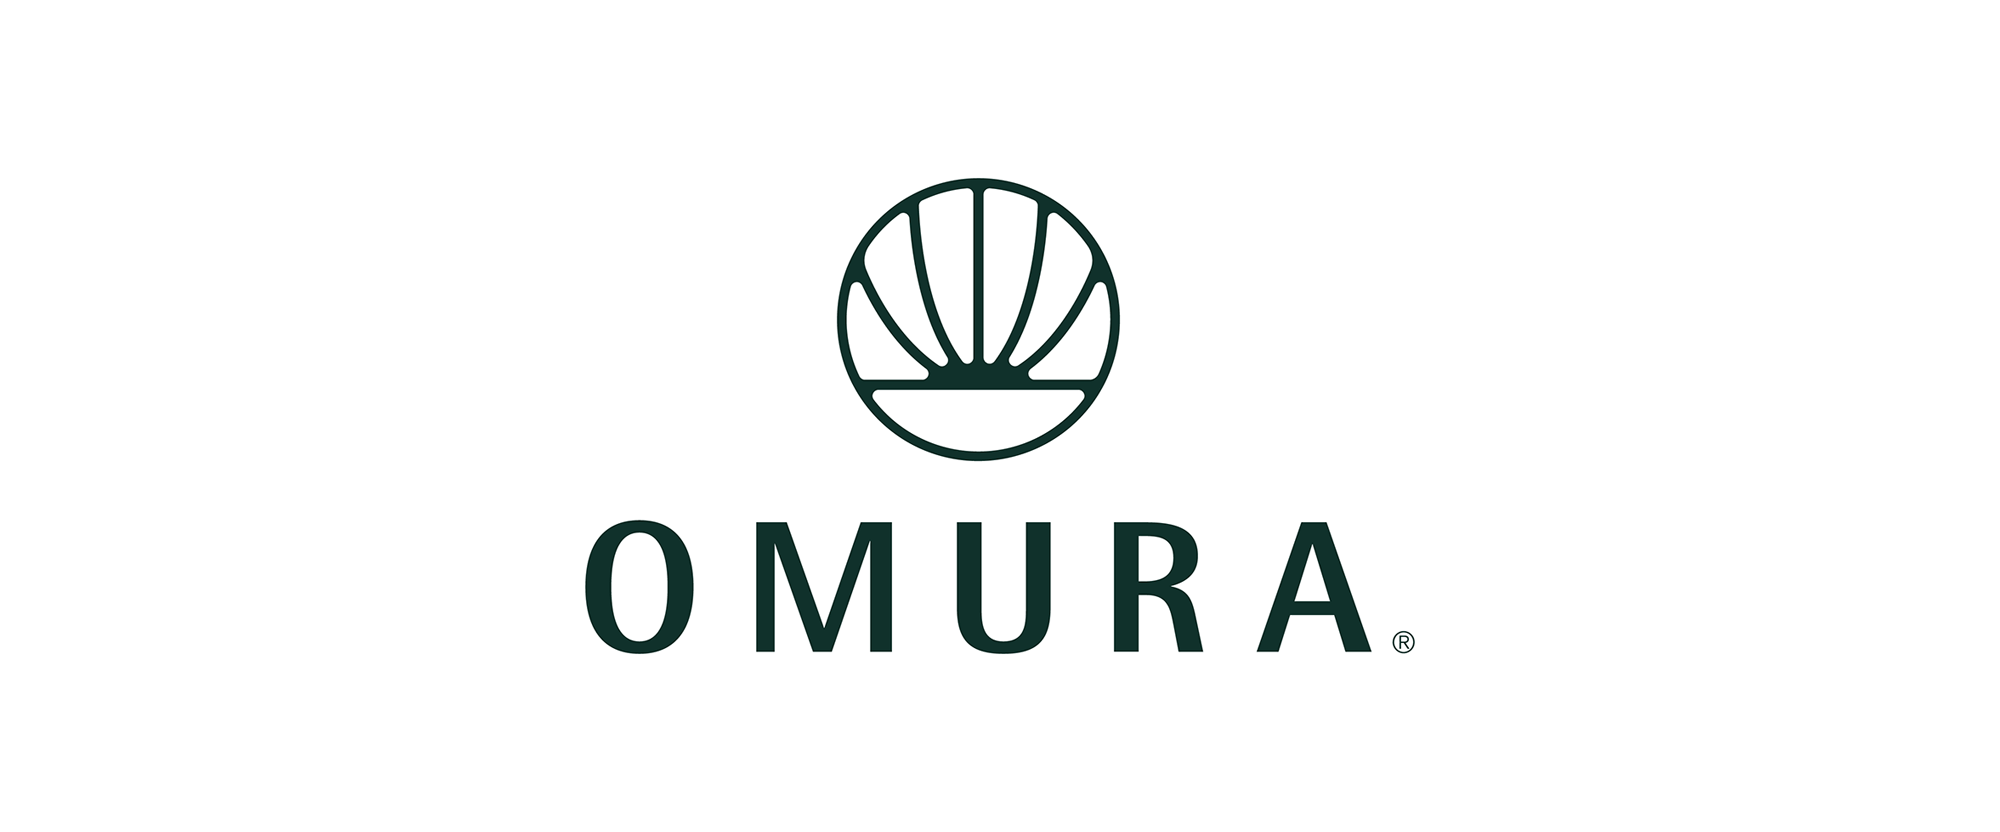 New Logo and Packaging for Omura by Safari Sundays